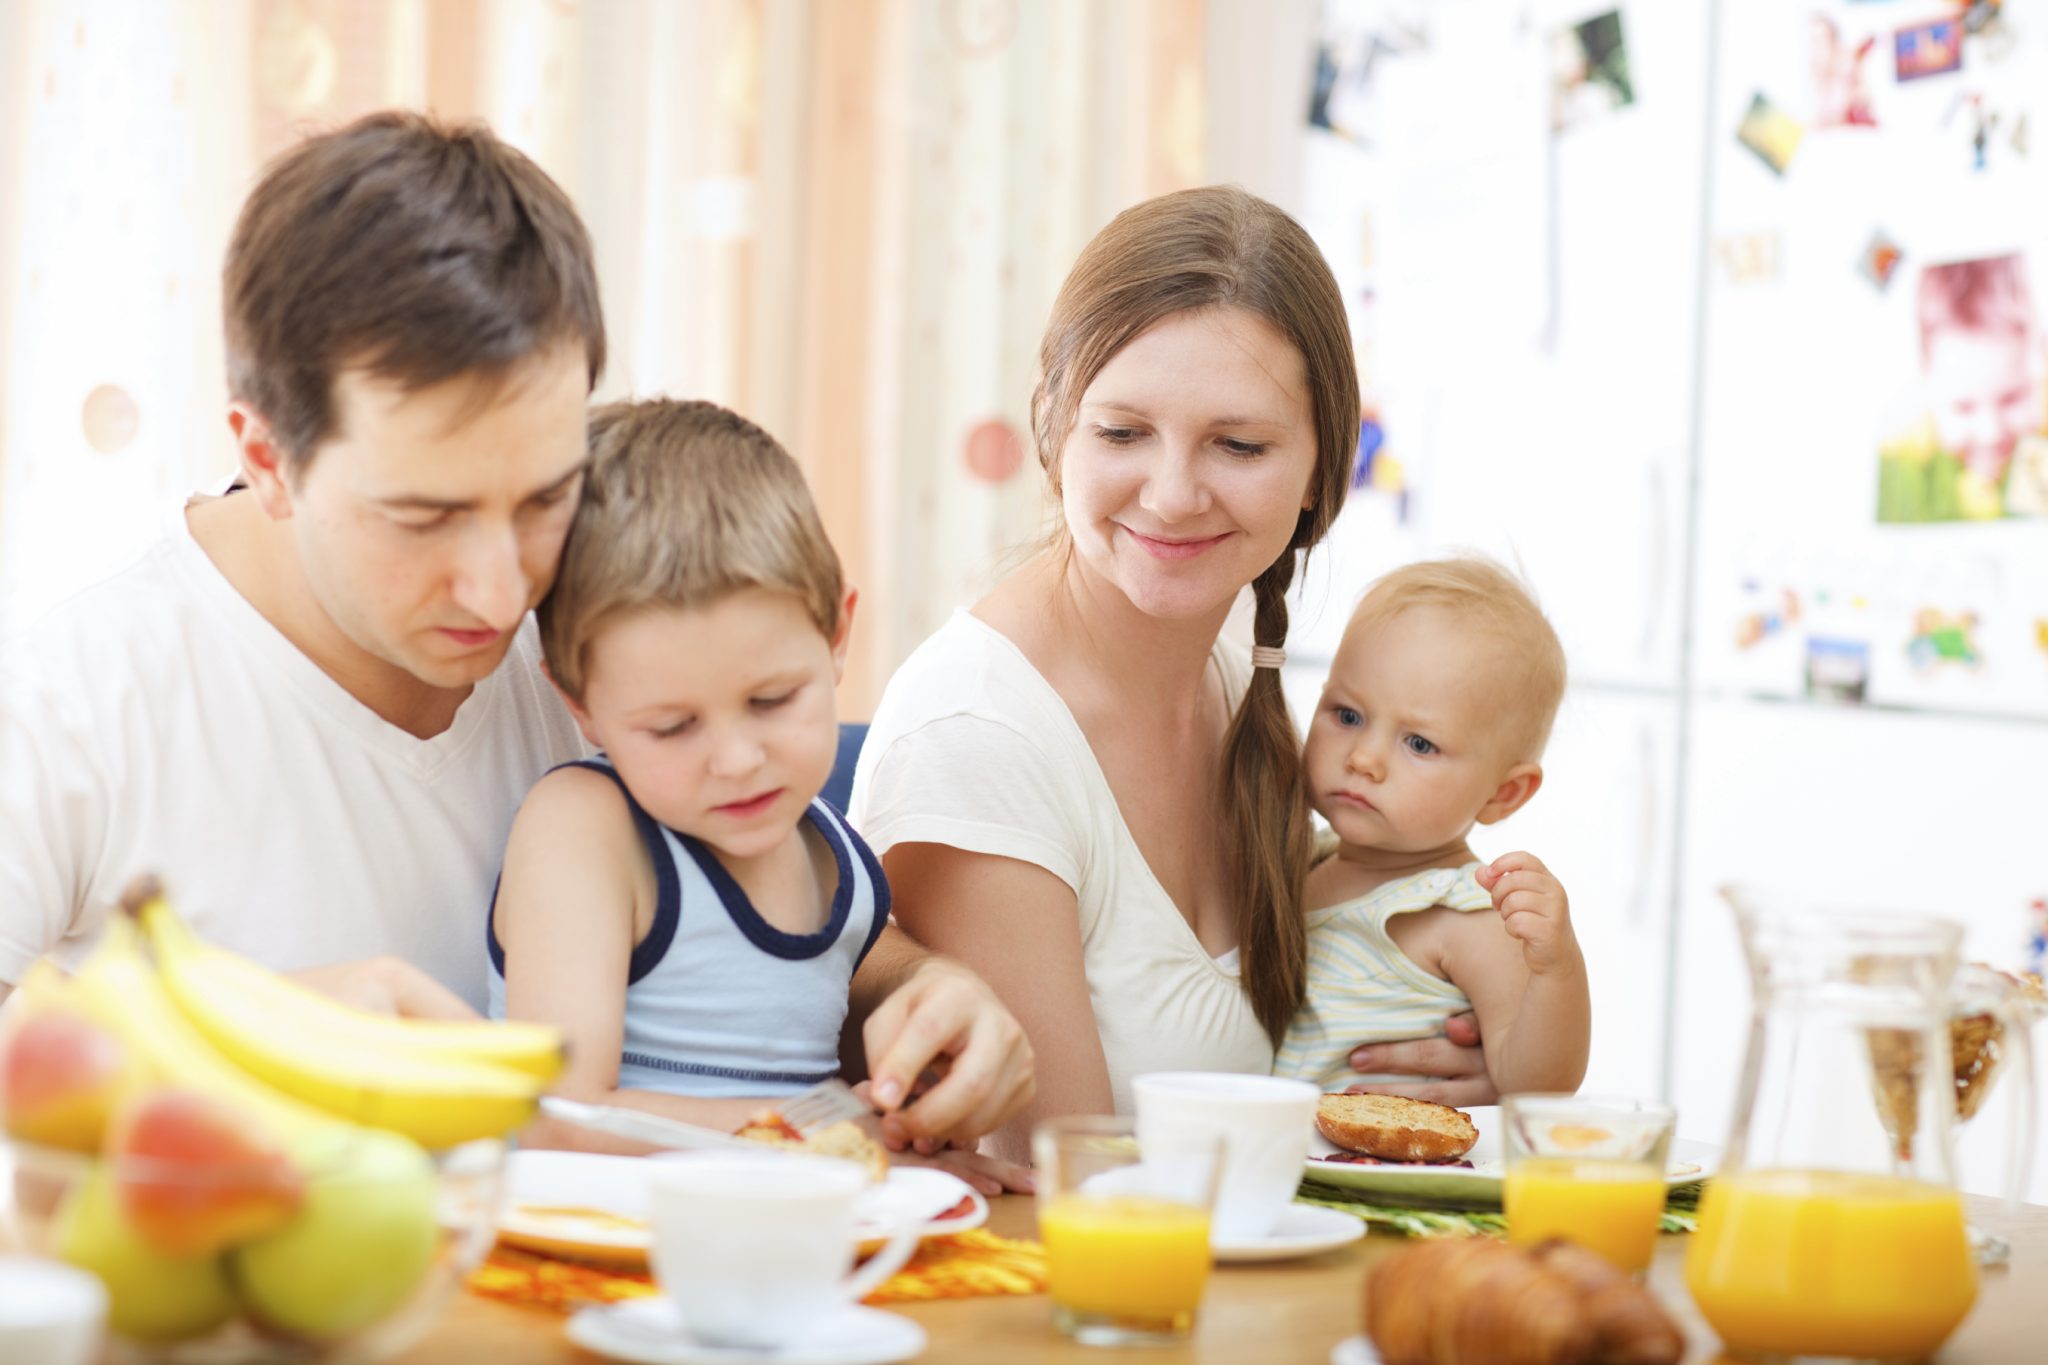 Family with small children eating breakfast. Dad holding toddler; mother holding baby.